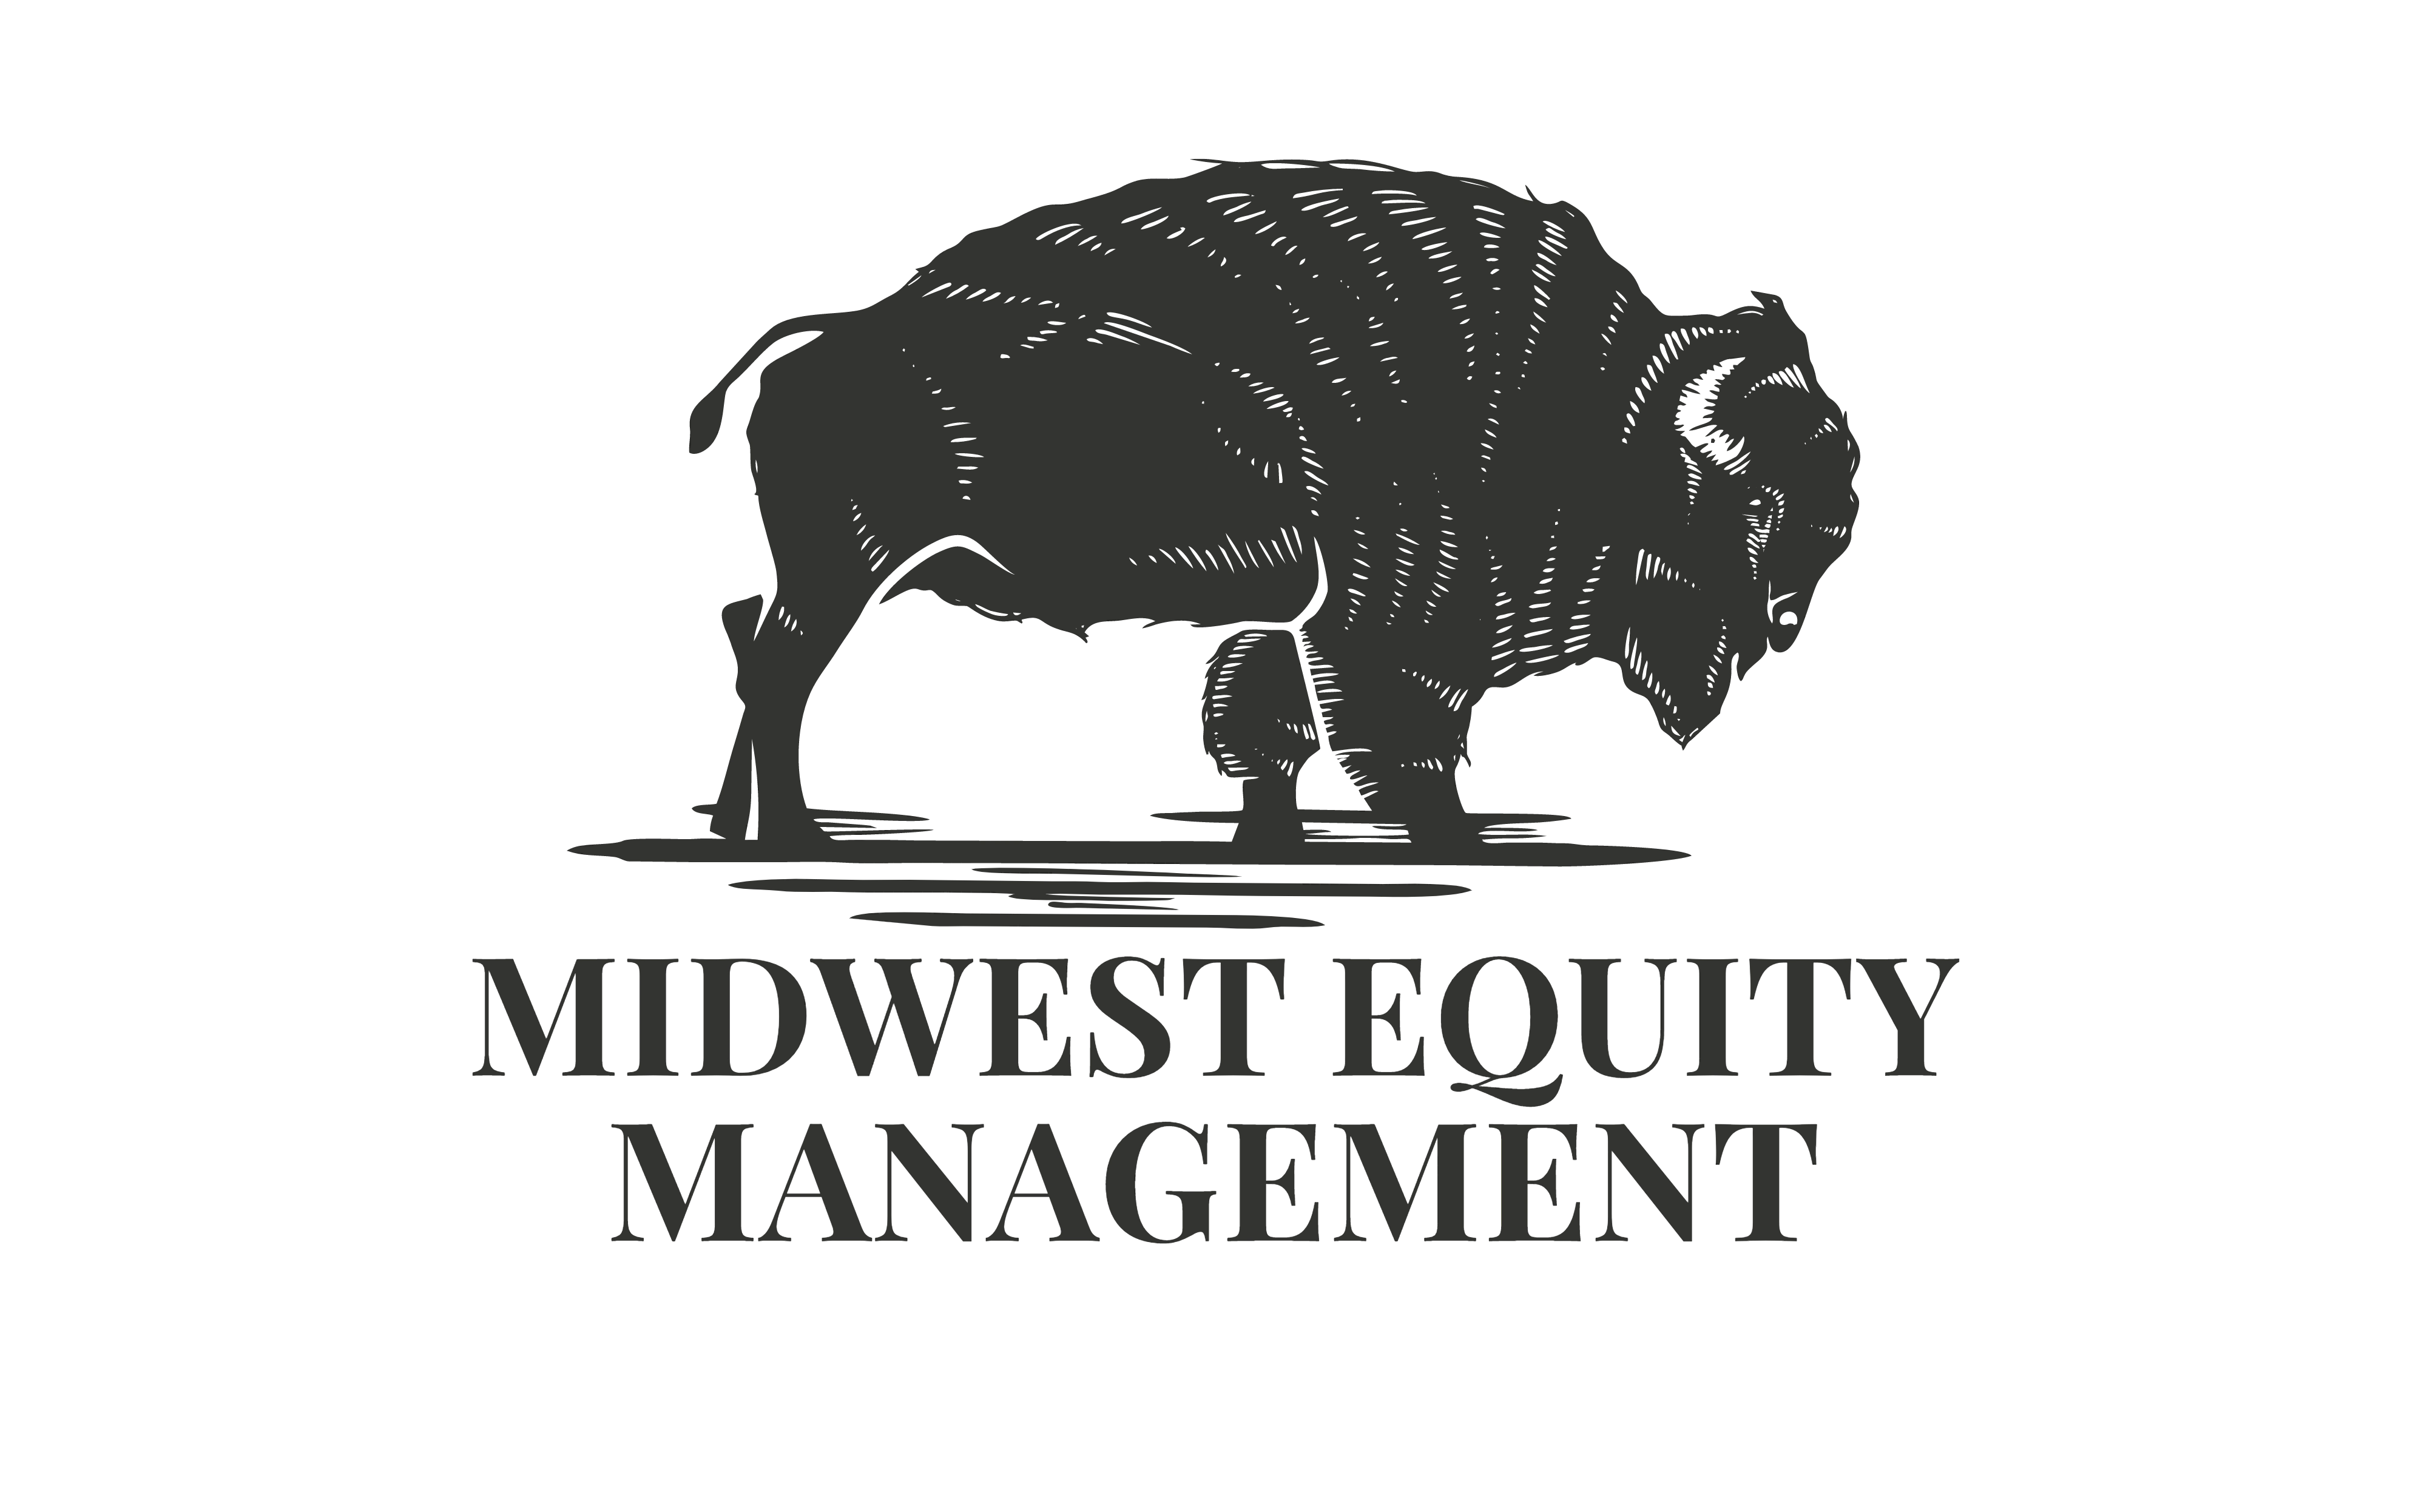 Midwest Equity Management tiny logo